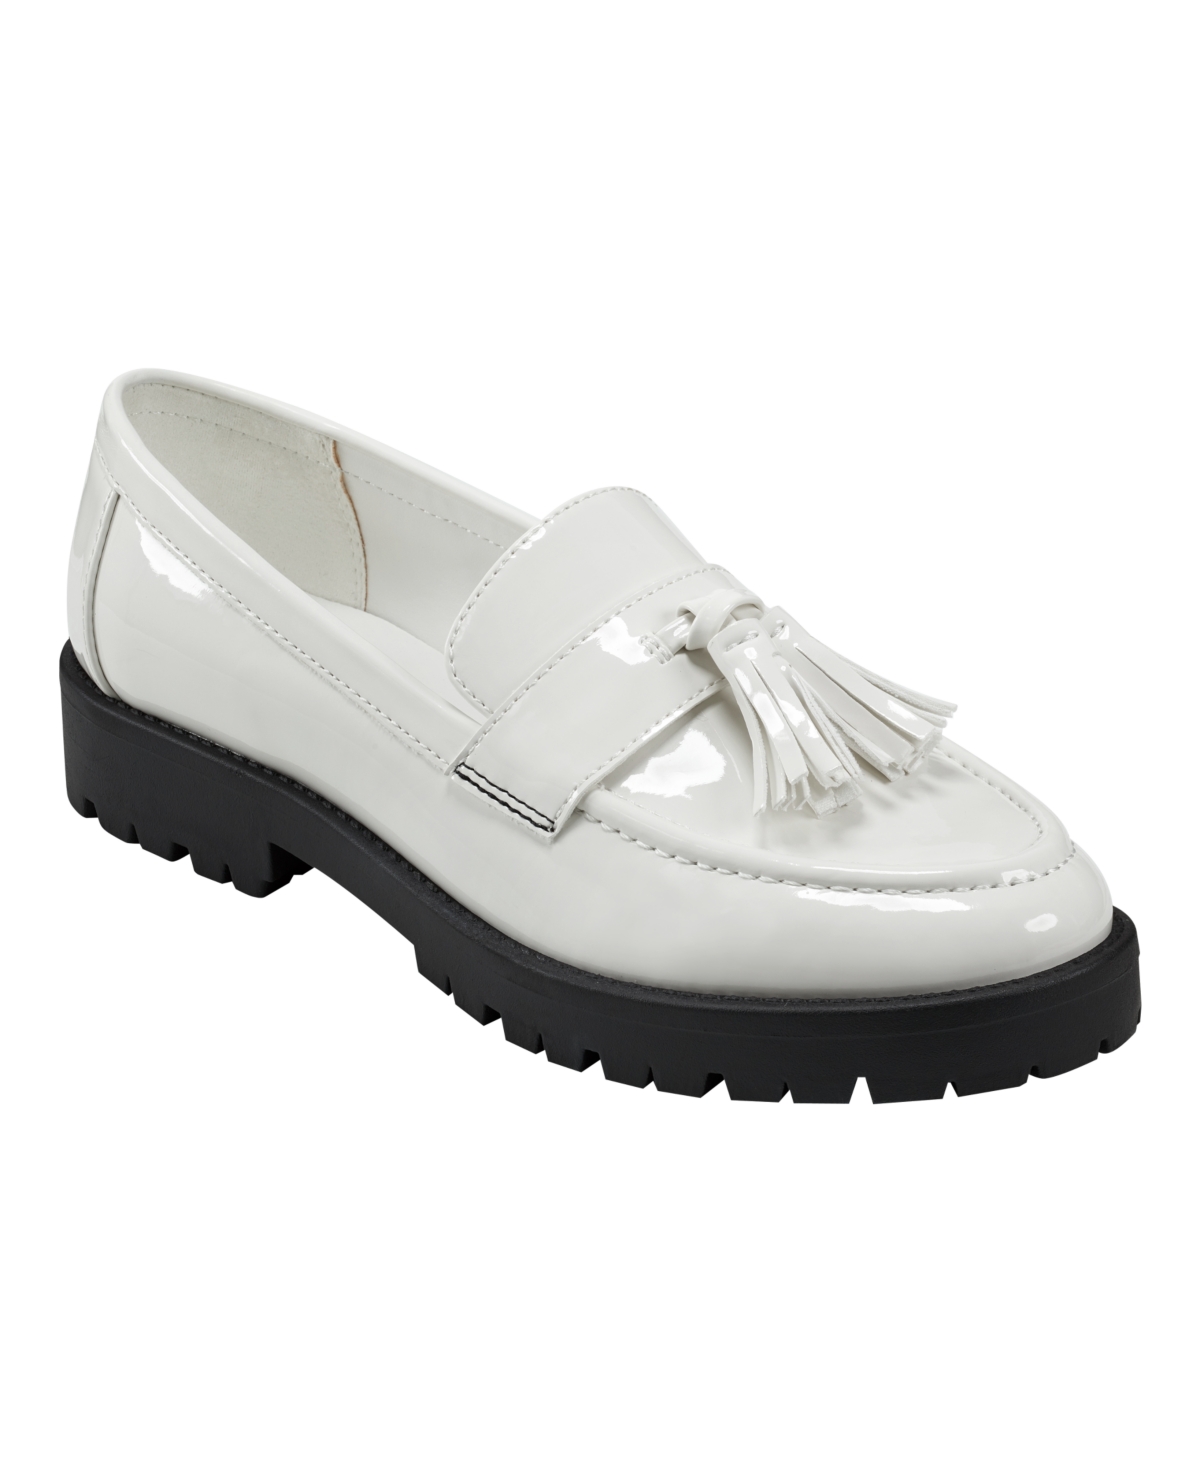 Women's Fillup Loafers - Cream Patent